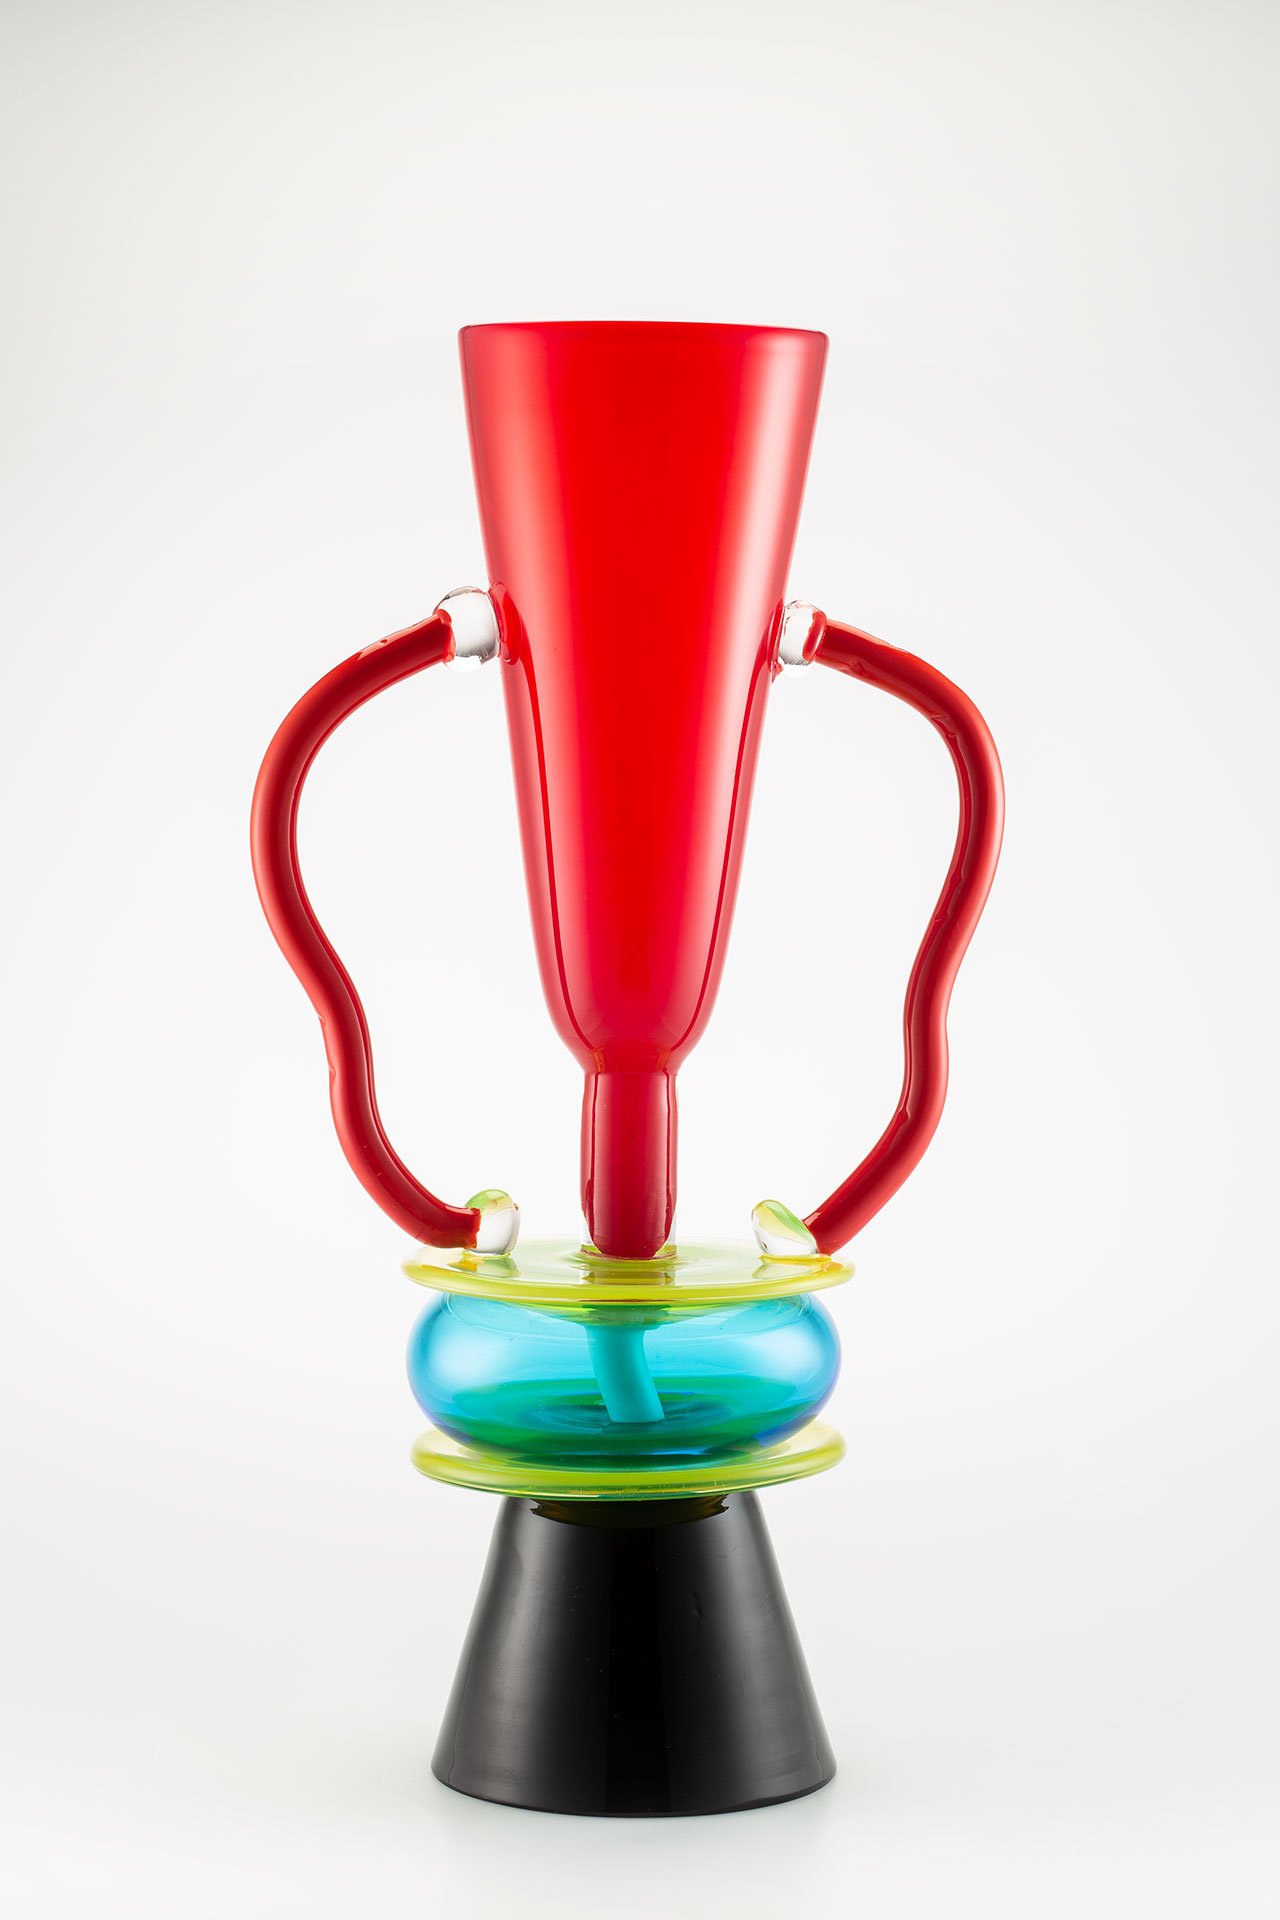 Sirio, design by Ettore Sottsass, Colorful, clear, hand-blown glass, colorless surface layer. Signed on the edge of the stand: "E. Sottsass per Memphis Milano”. Designed in 1982.  Signed on the base. Photo by Francesco Allegretto, courtesy Fondazione Berengo.